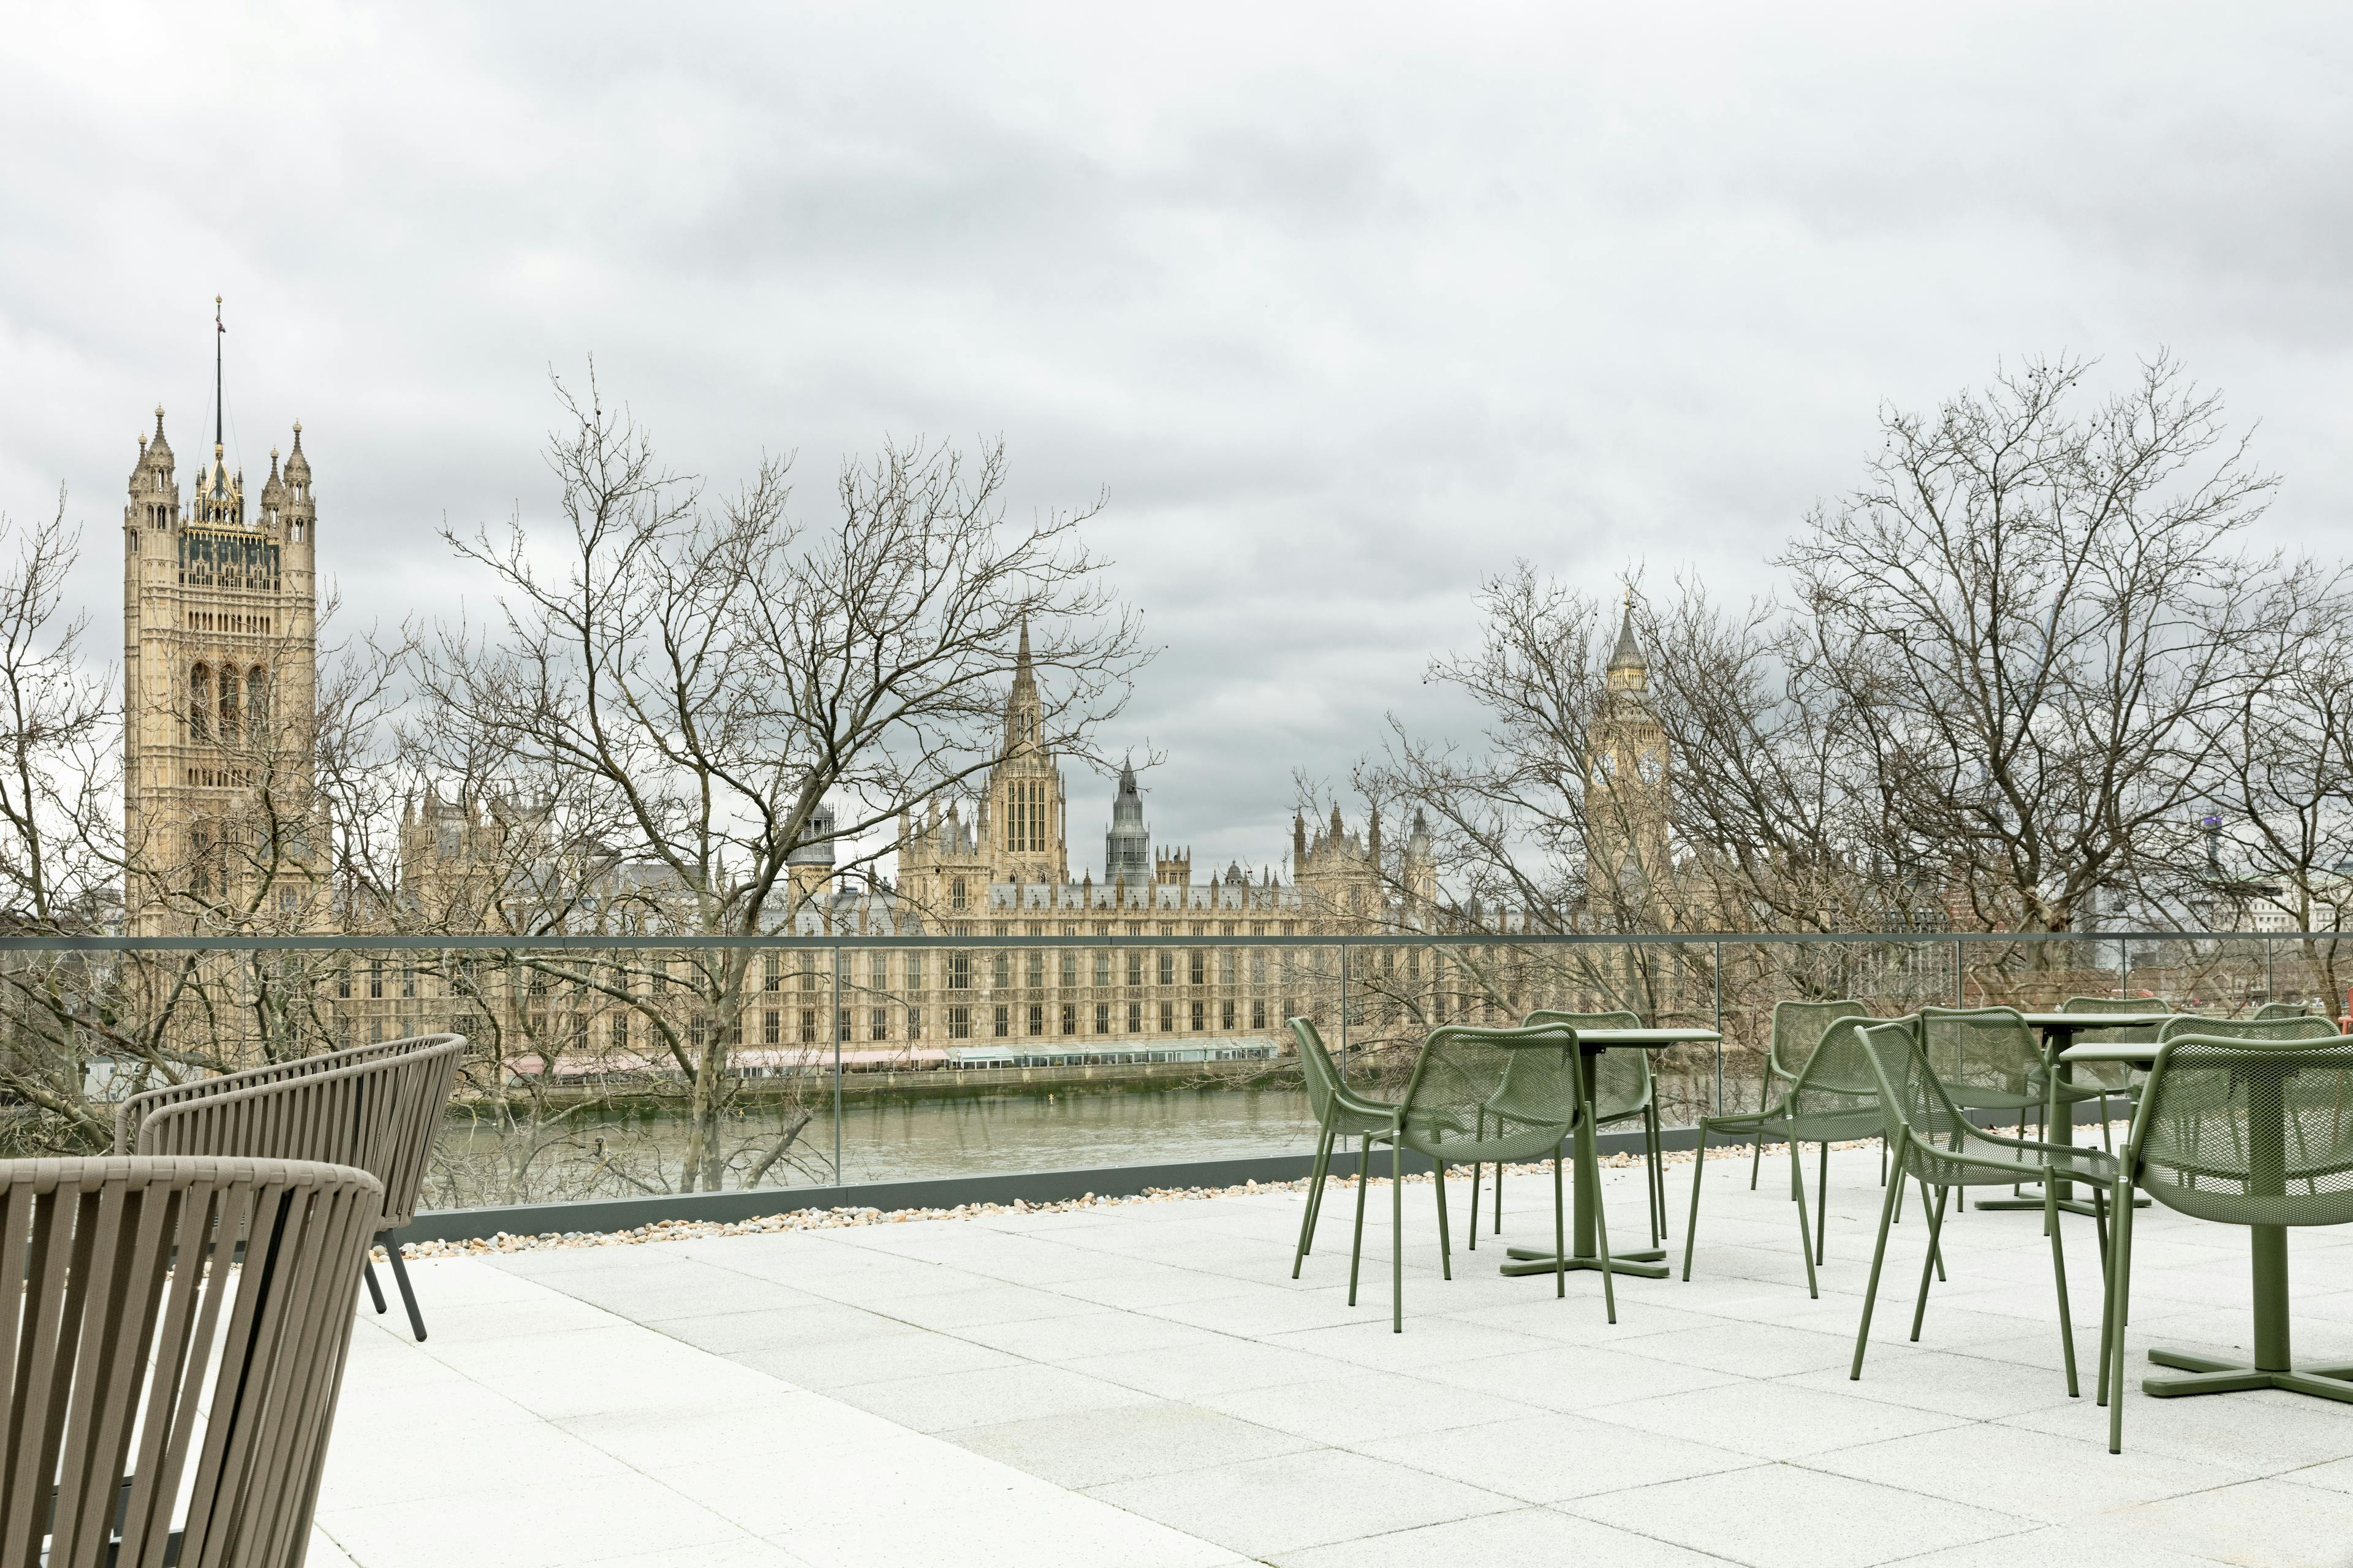 Balcony with seating overlooking the Thames